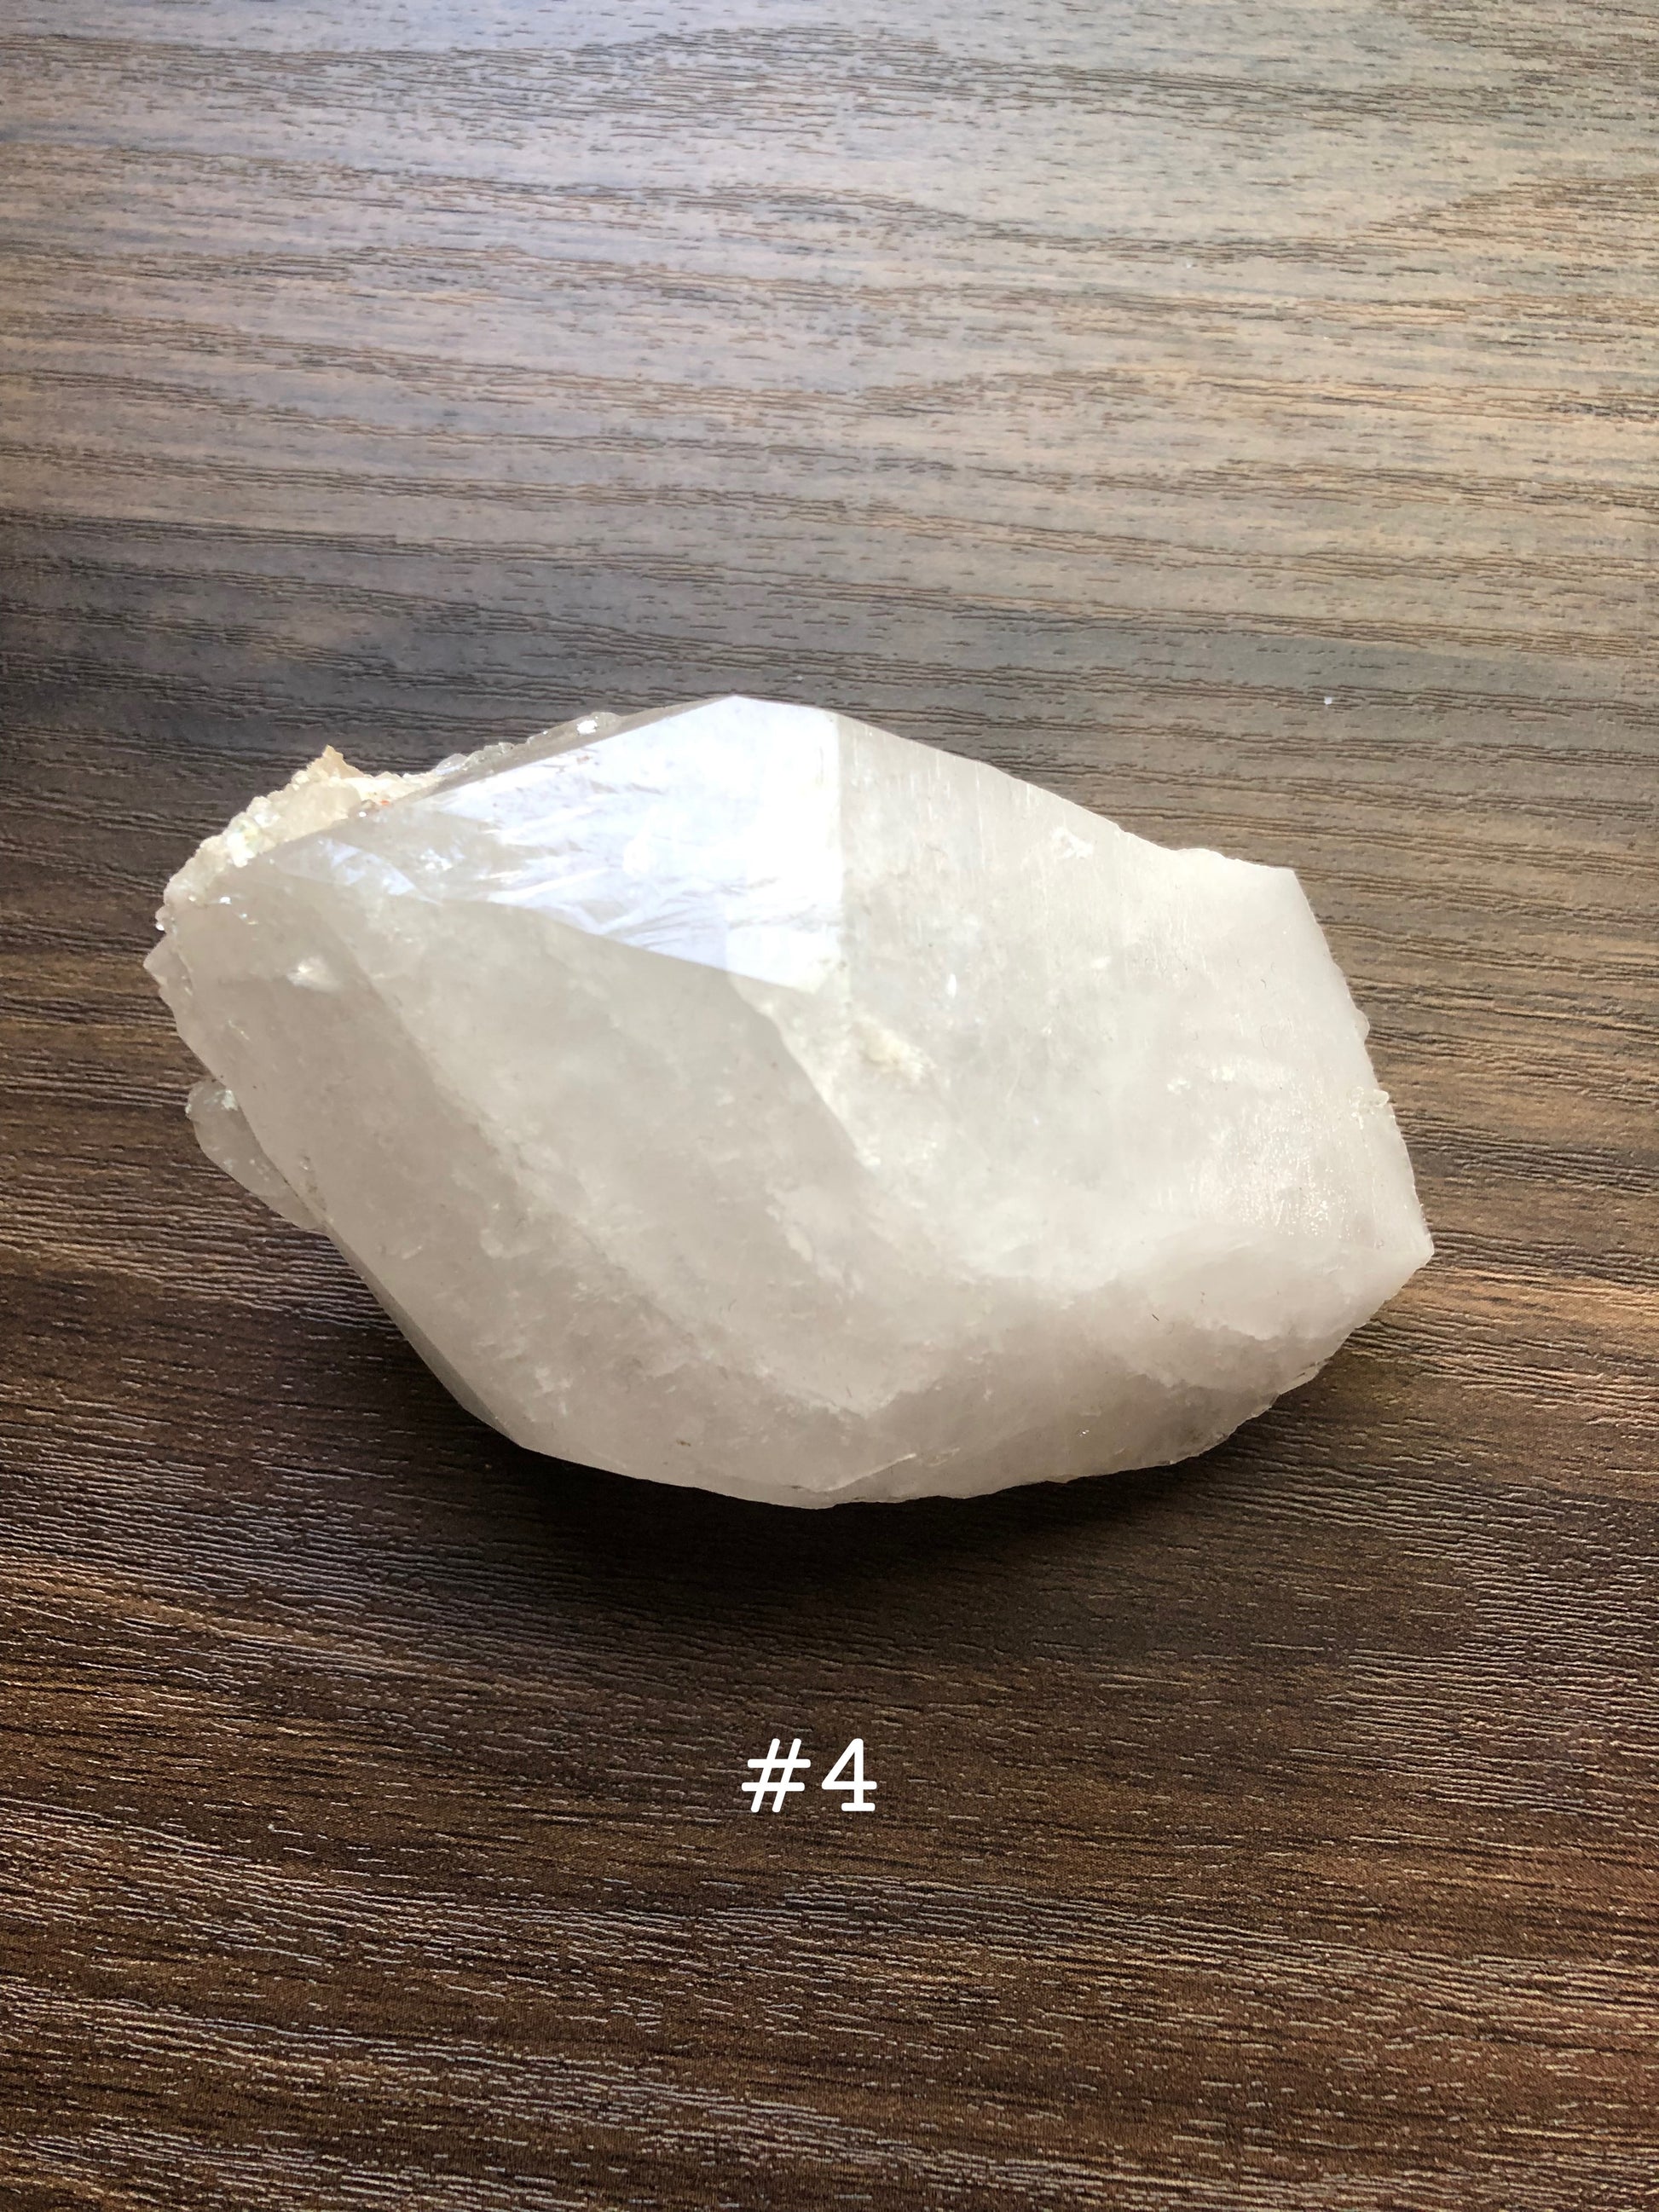 A large, rough cut quartz crystal rests on a wooden surface. It is wide and circular in shape. The crystal is relatively clear. The number 4 is shown on the picture.